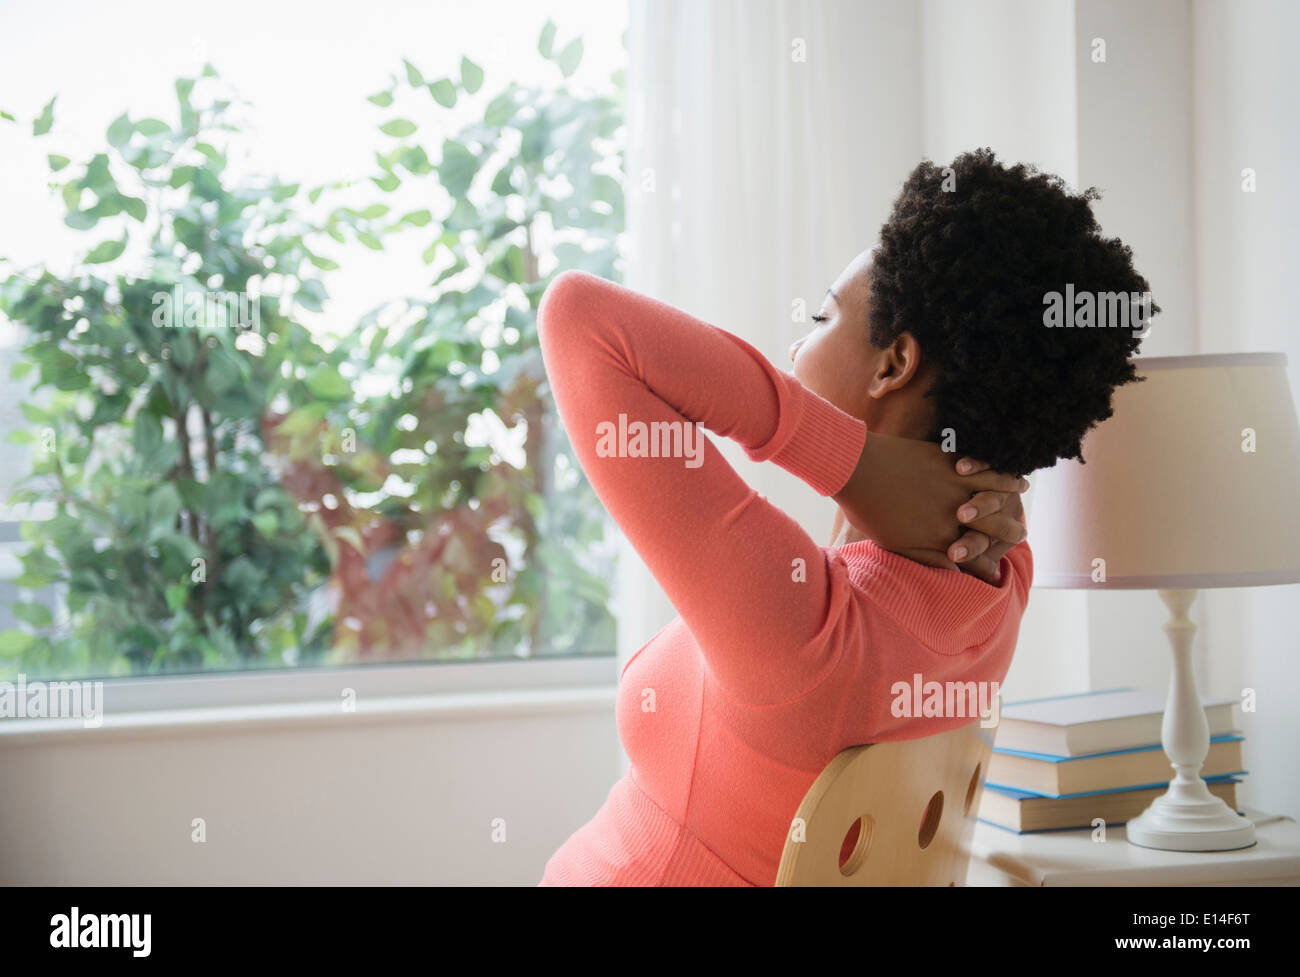 Black woman relaxing at window with hands behind head Stock Photo